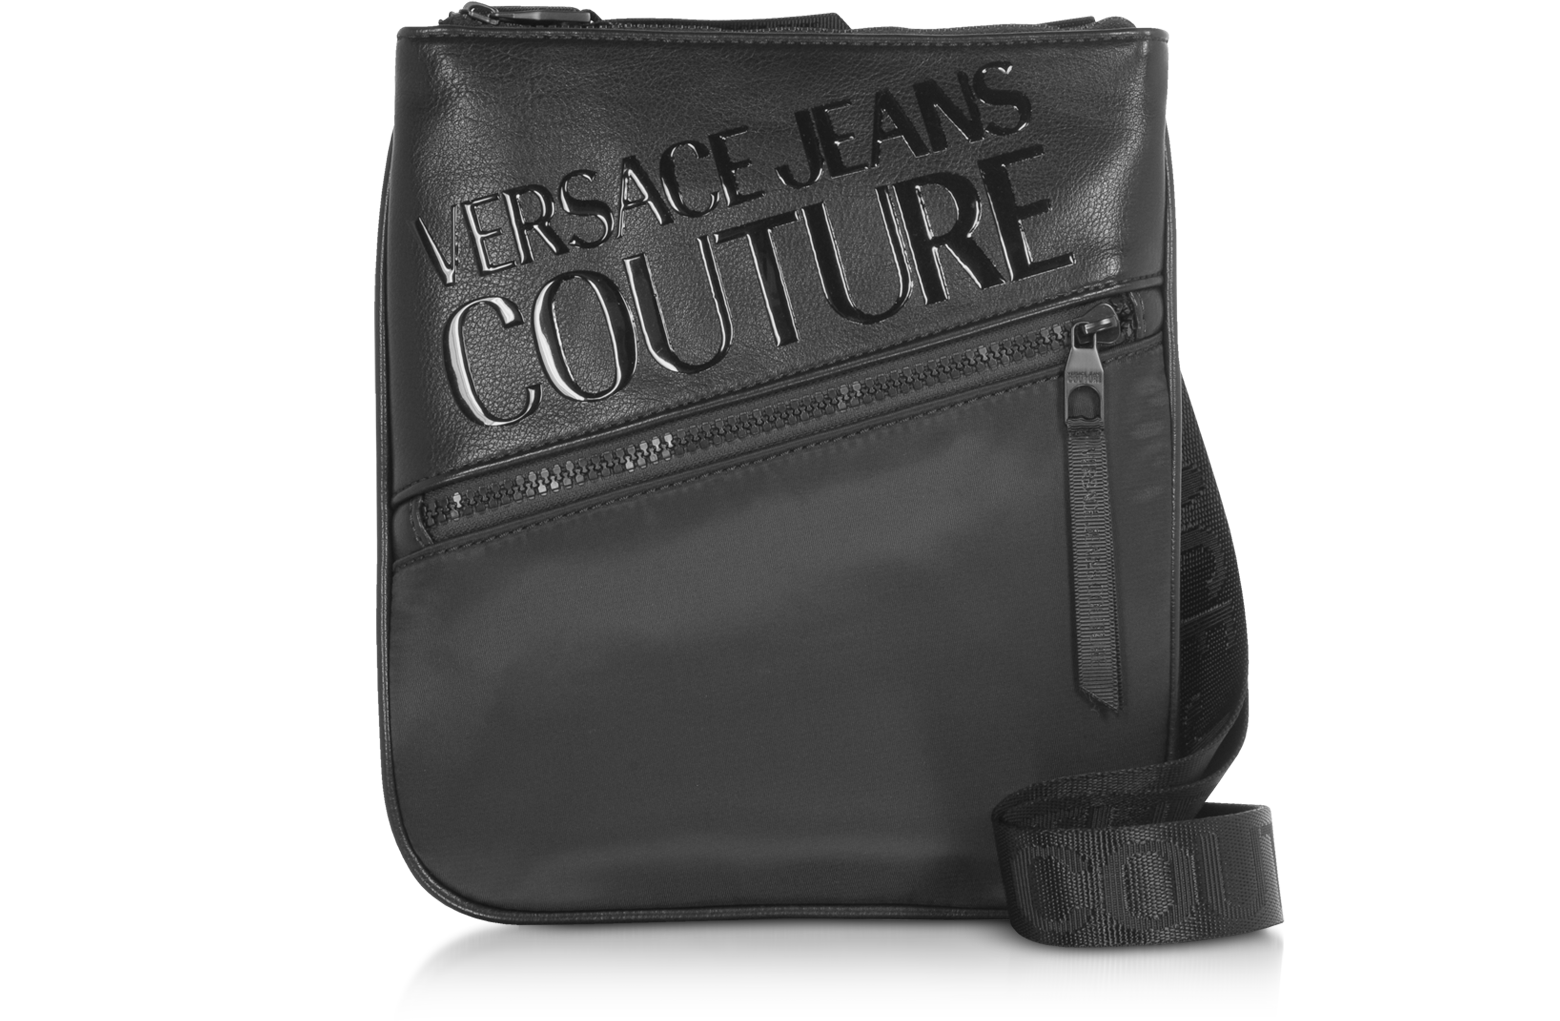 Versace Jeans Couture Black White Leather Signature Logo Crossbody Bag